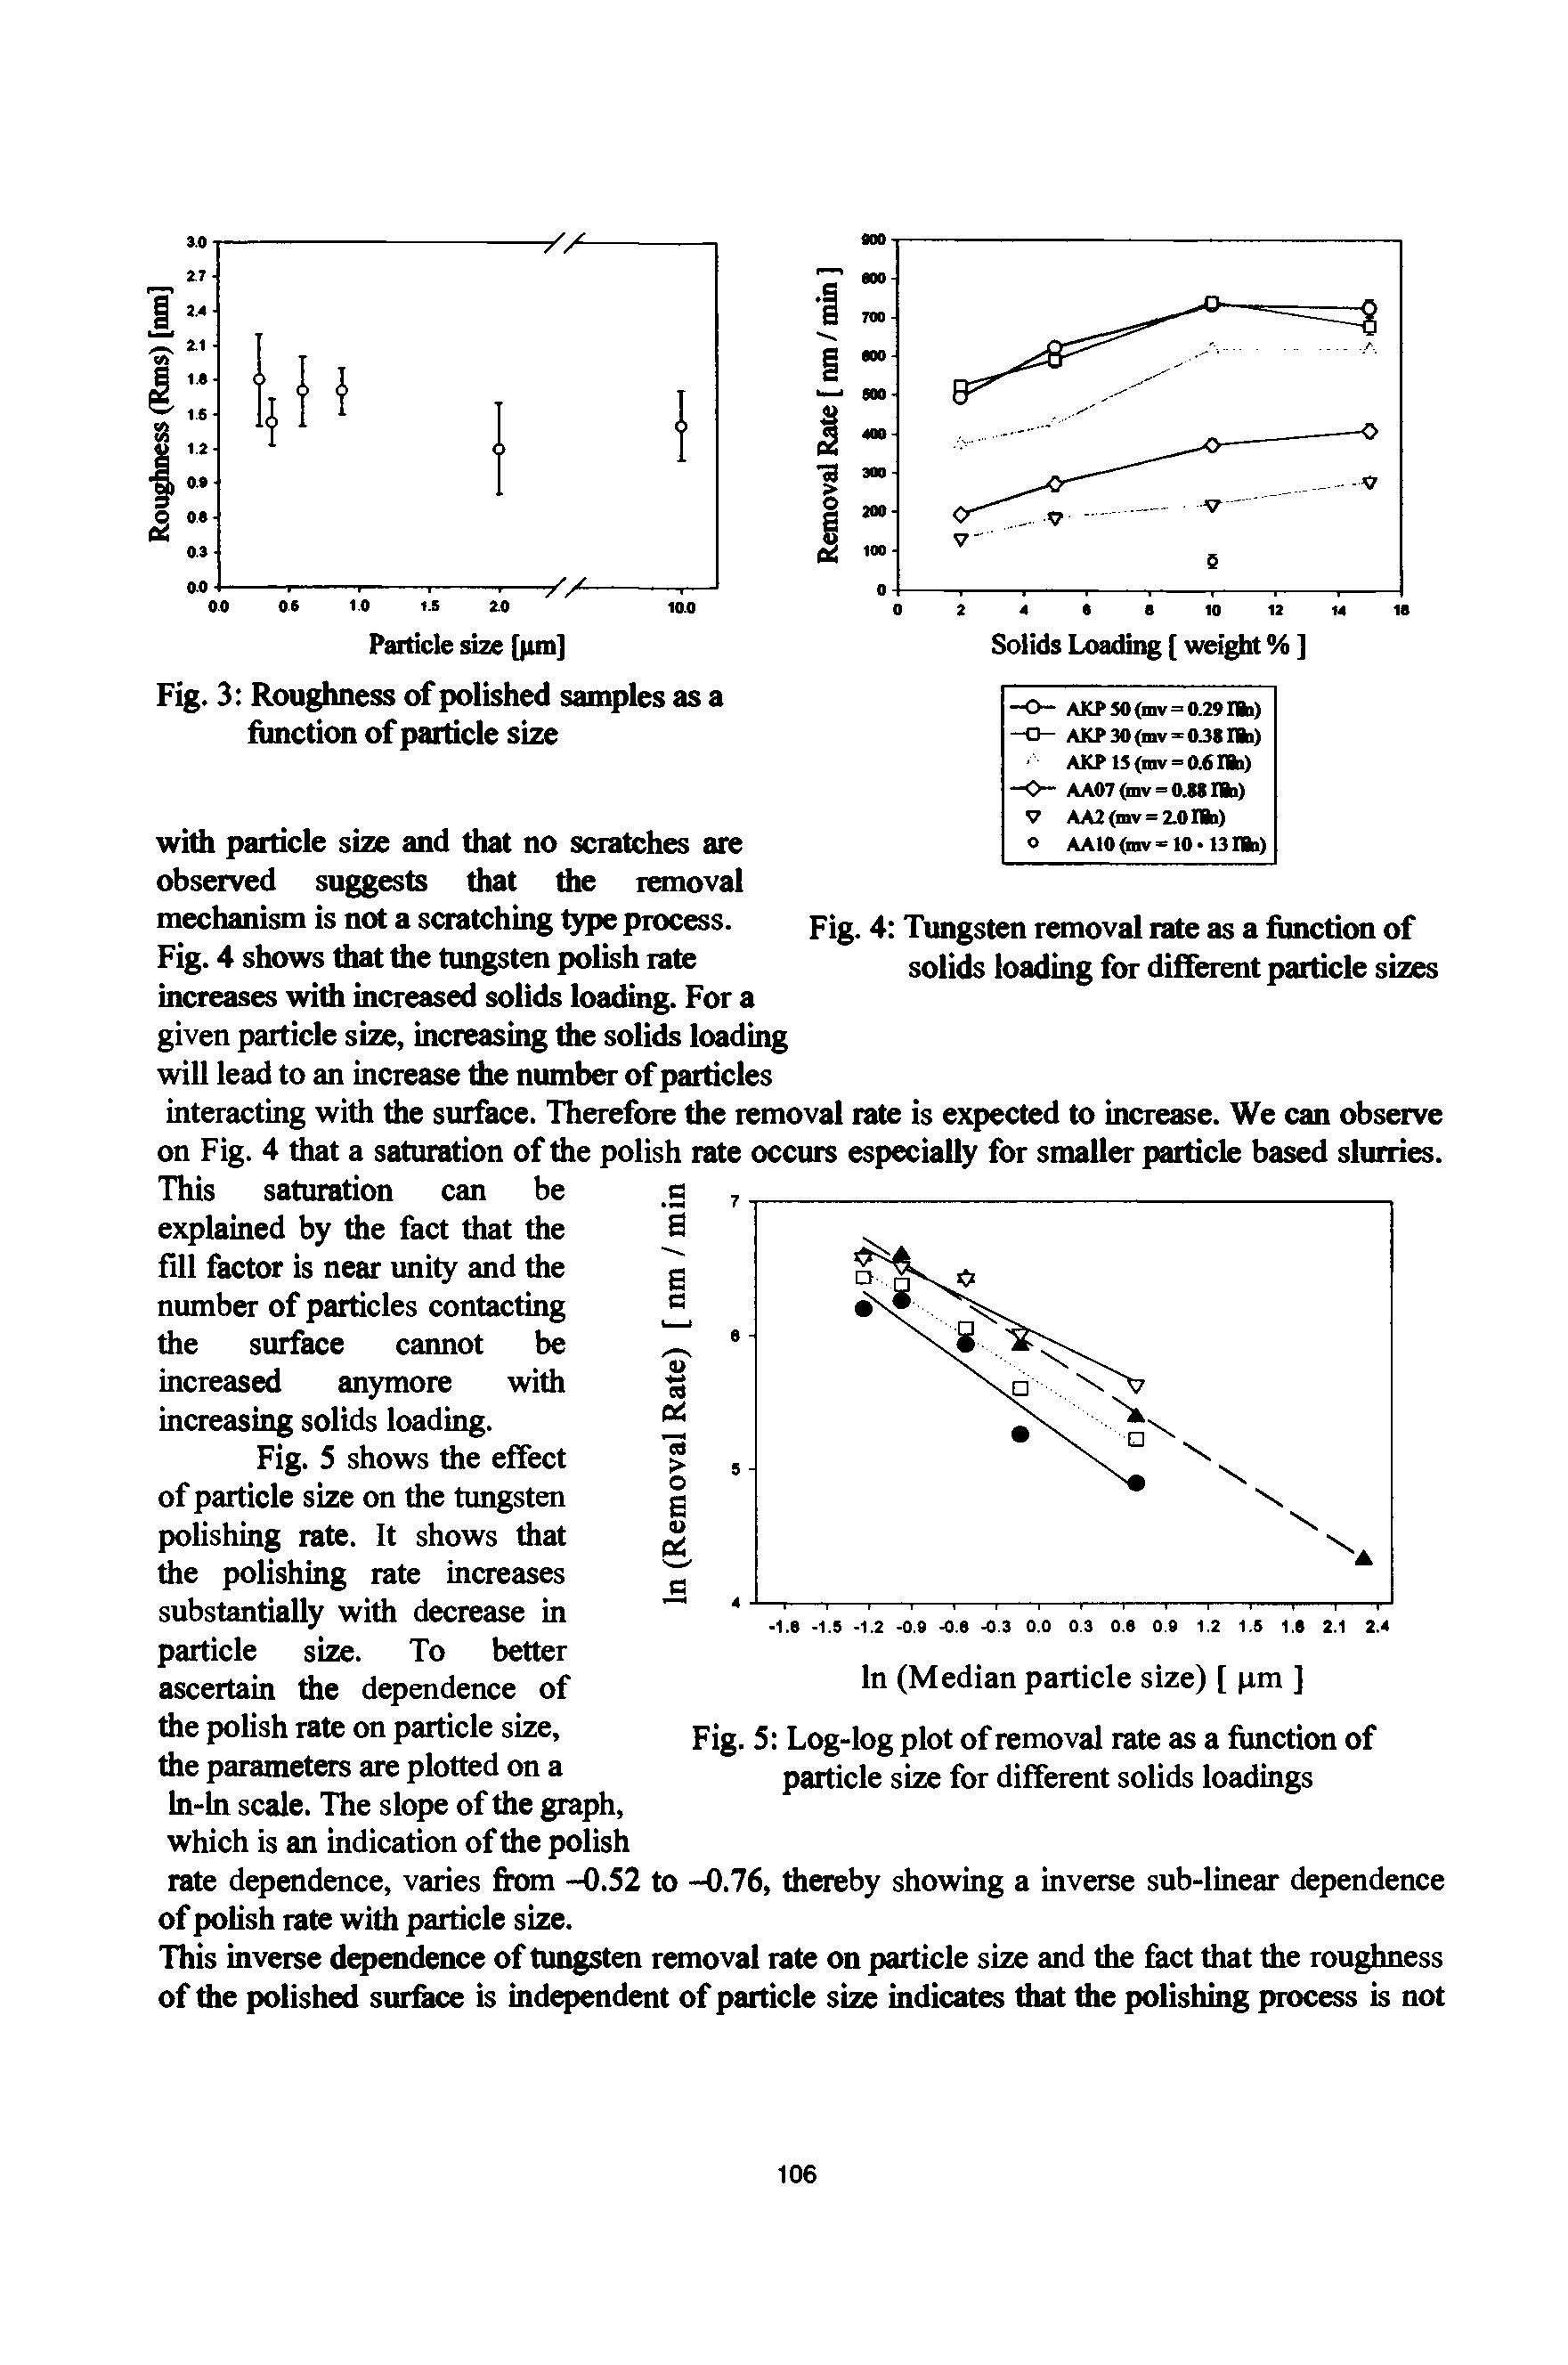 Fig. 4 Tungsten removal rate as a function of solids loading for different particle sizes...